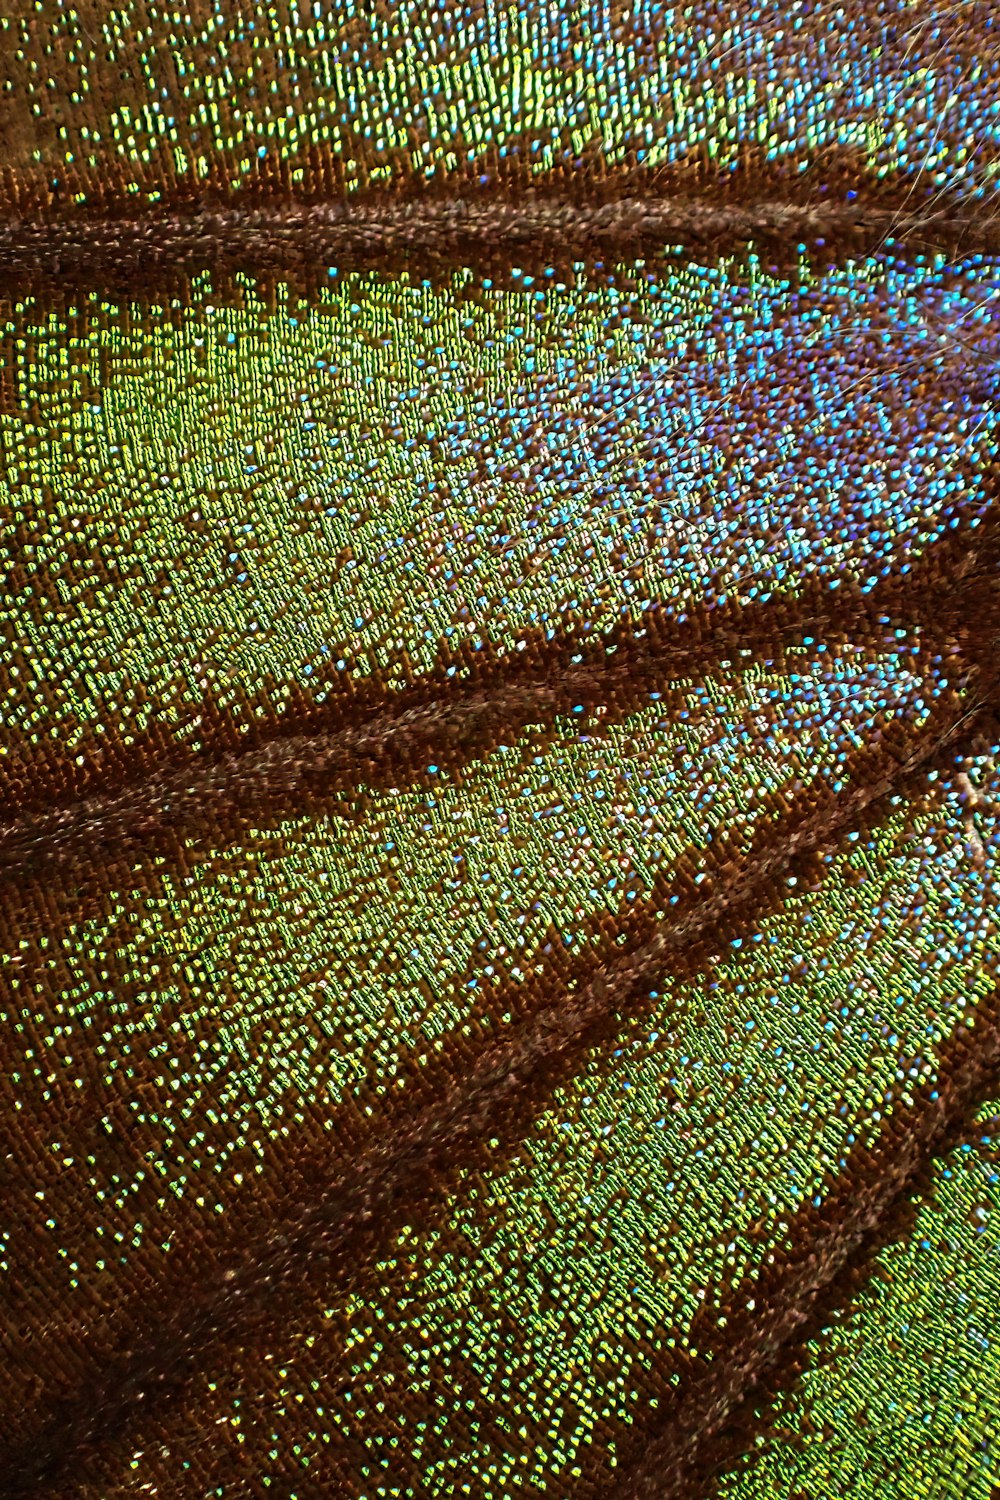 a close up view of a butterfly wing